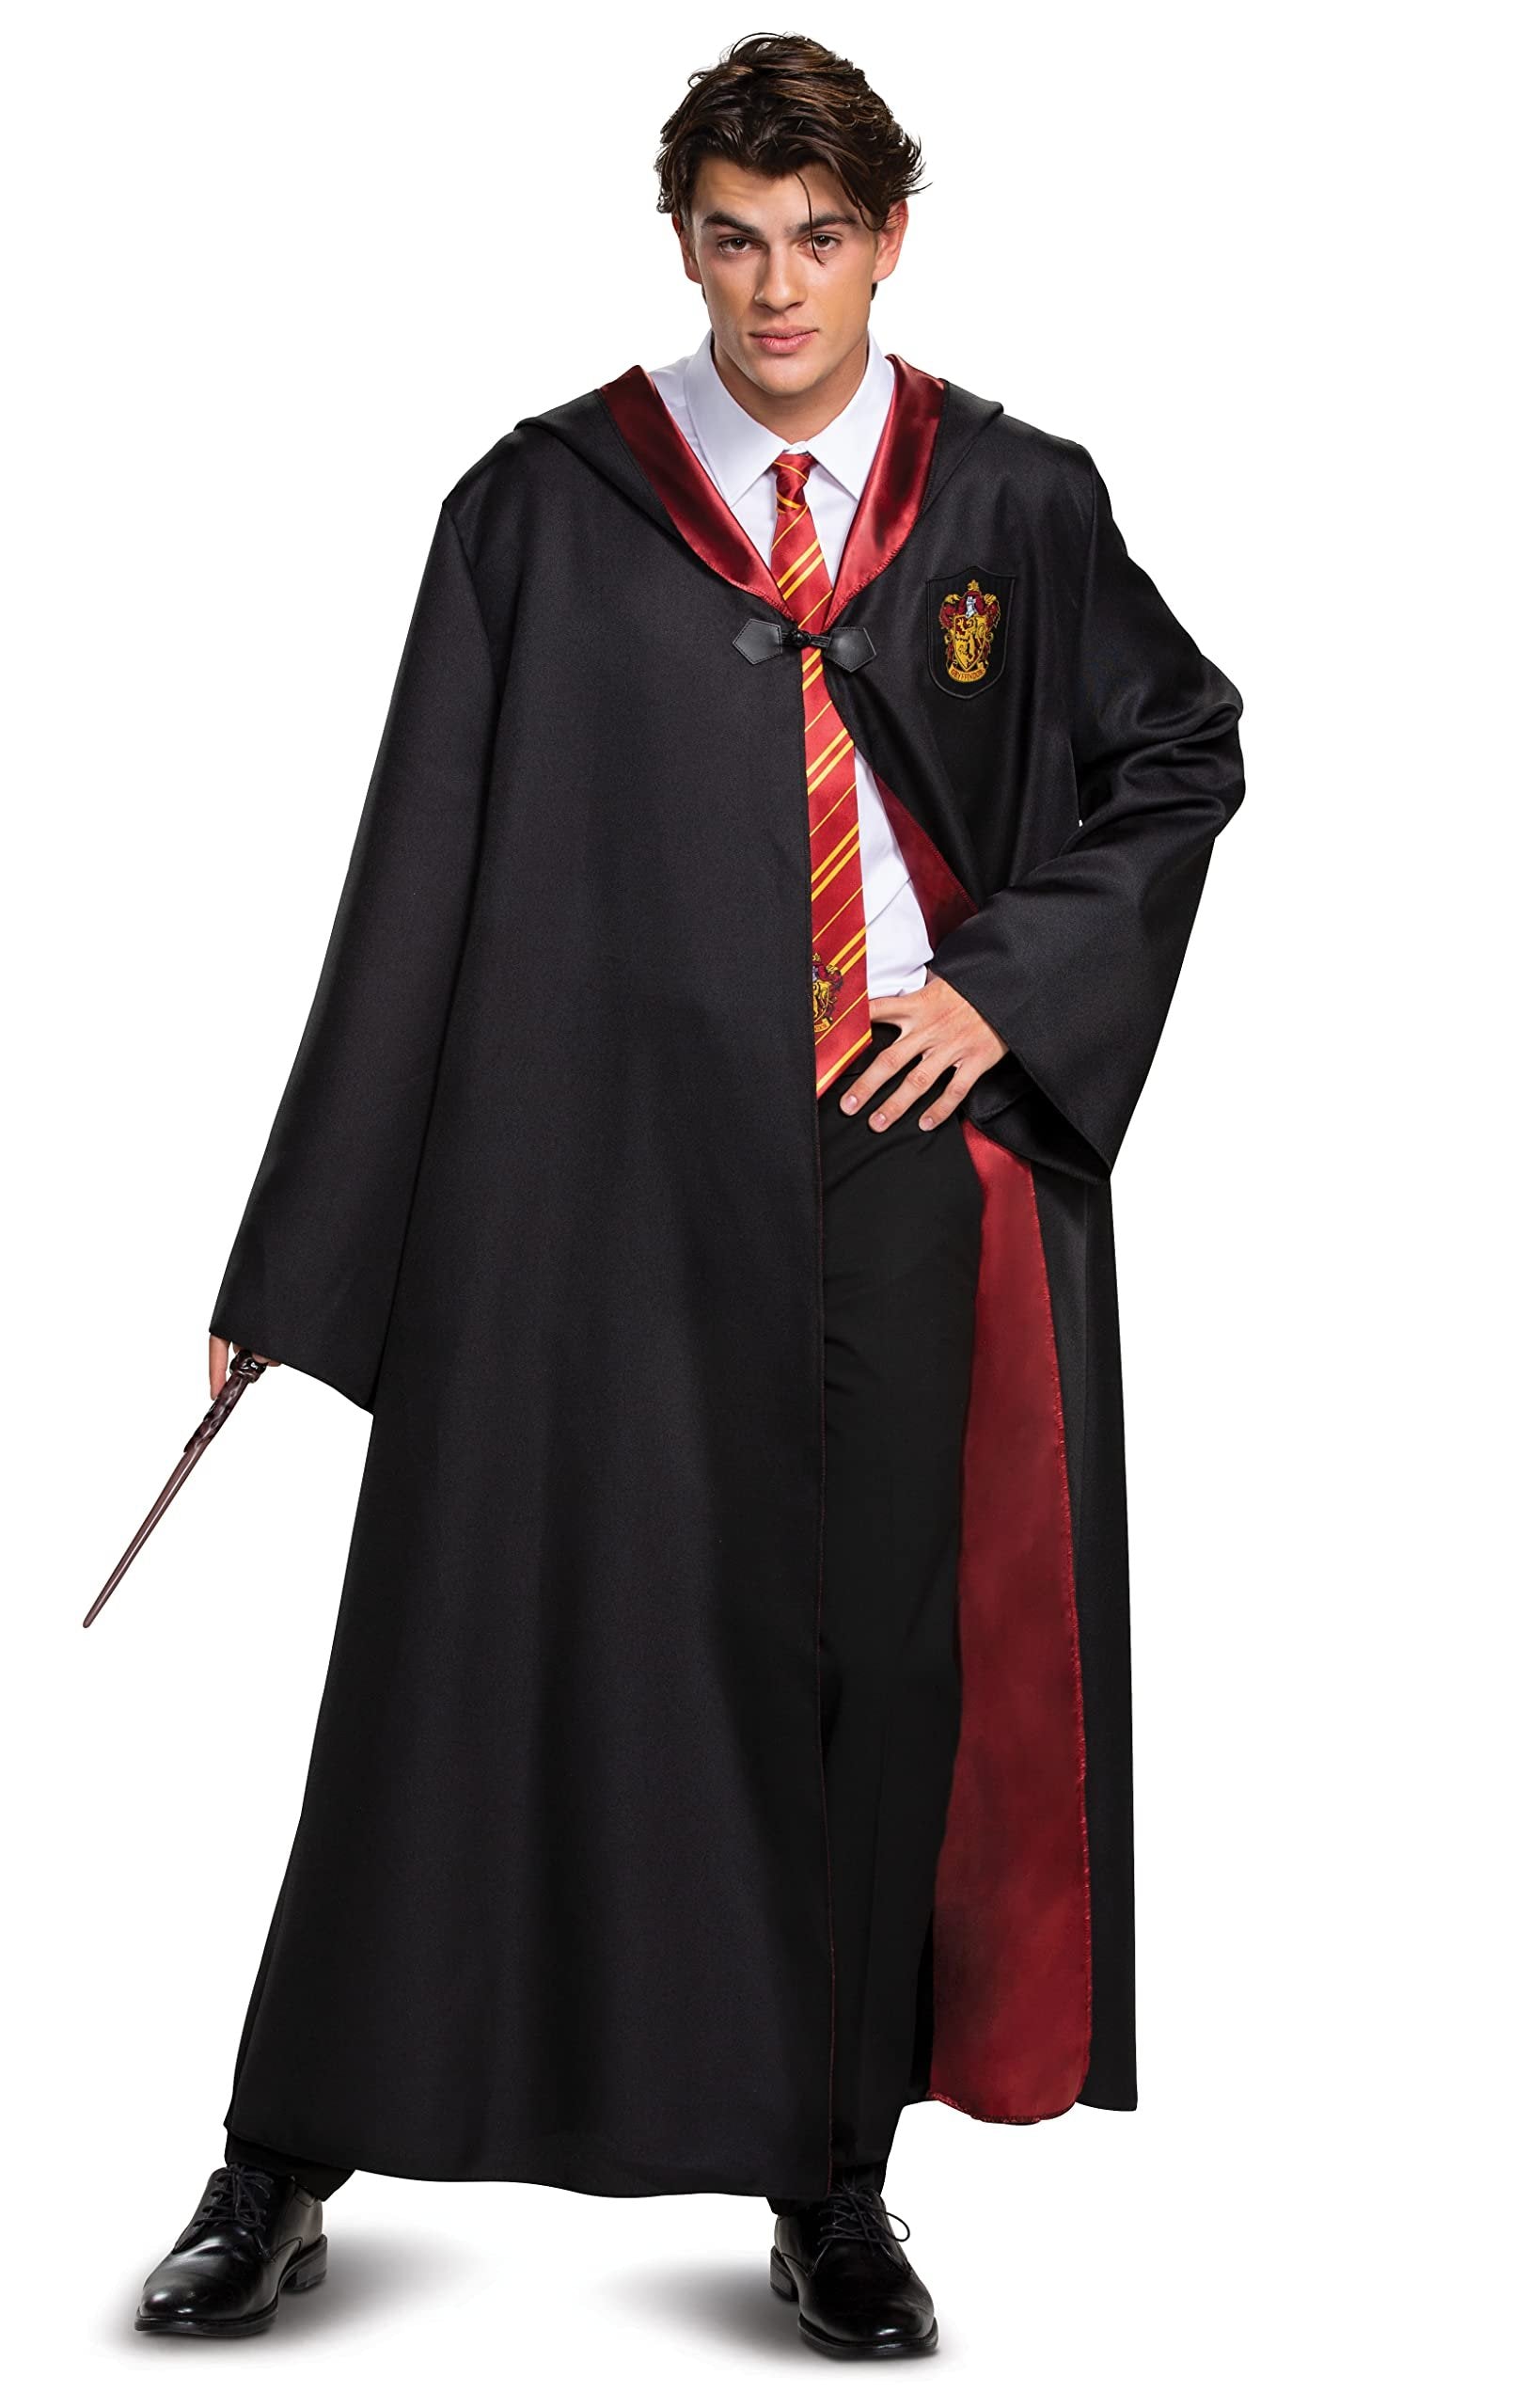 Disguise Harry Potter Gryffindor Costume Combo, Deluxe Hooded Robe with Tie for Adults, As Shown, Extra Small (14-16)